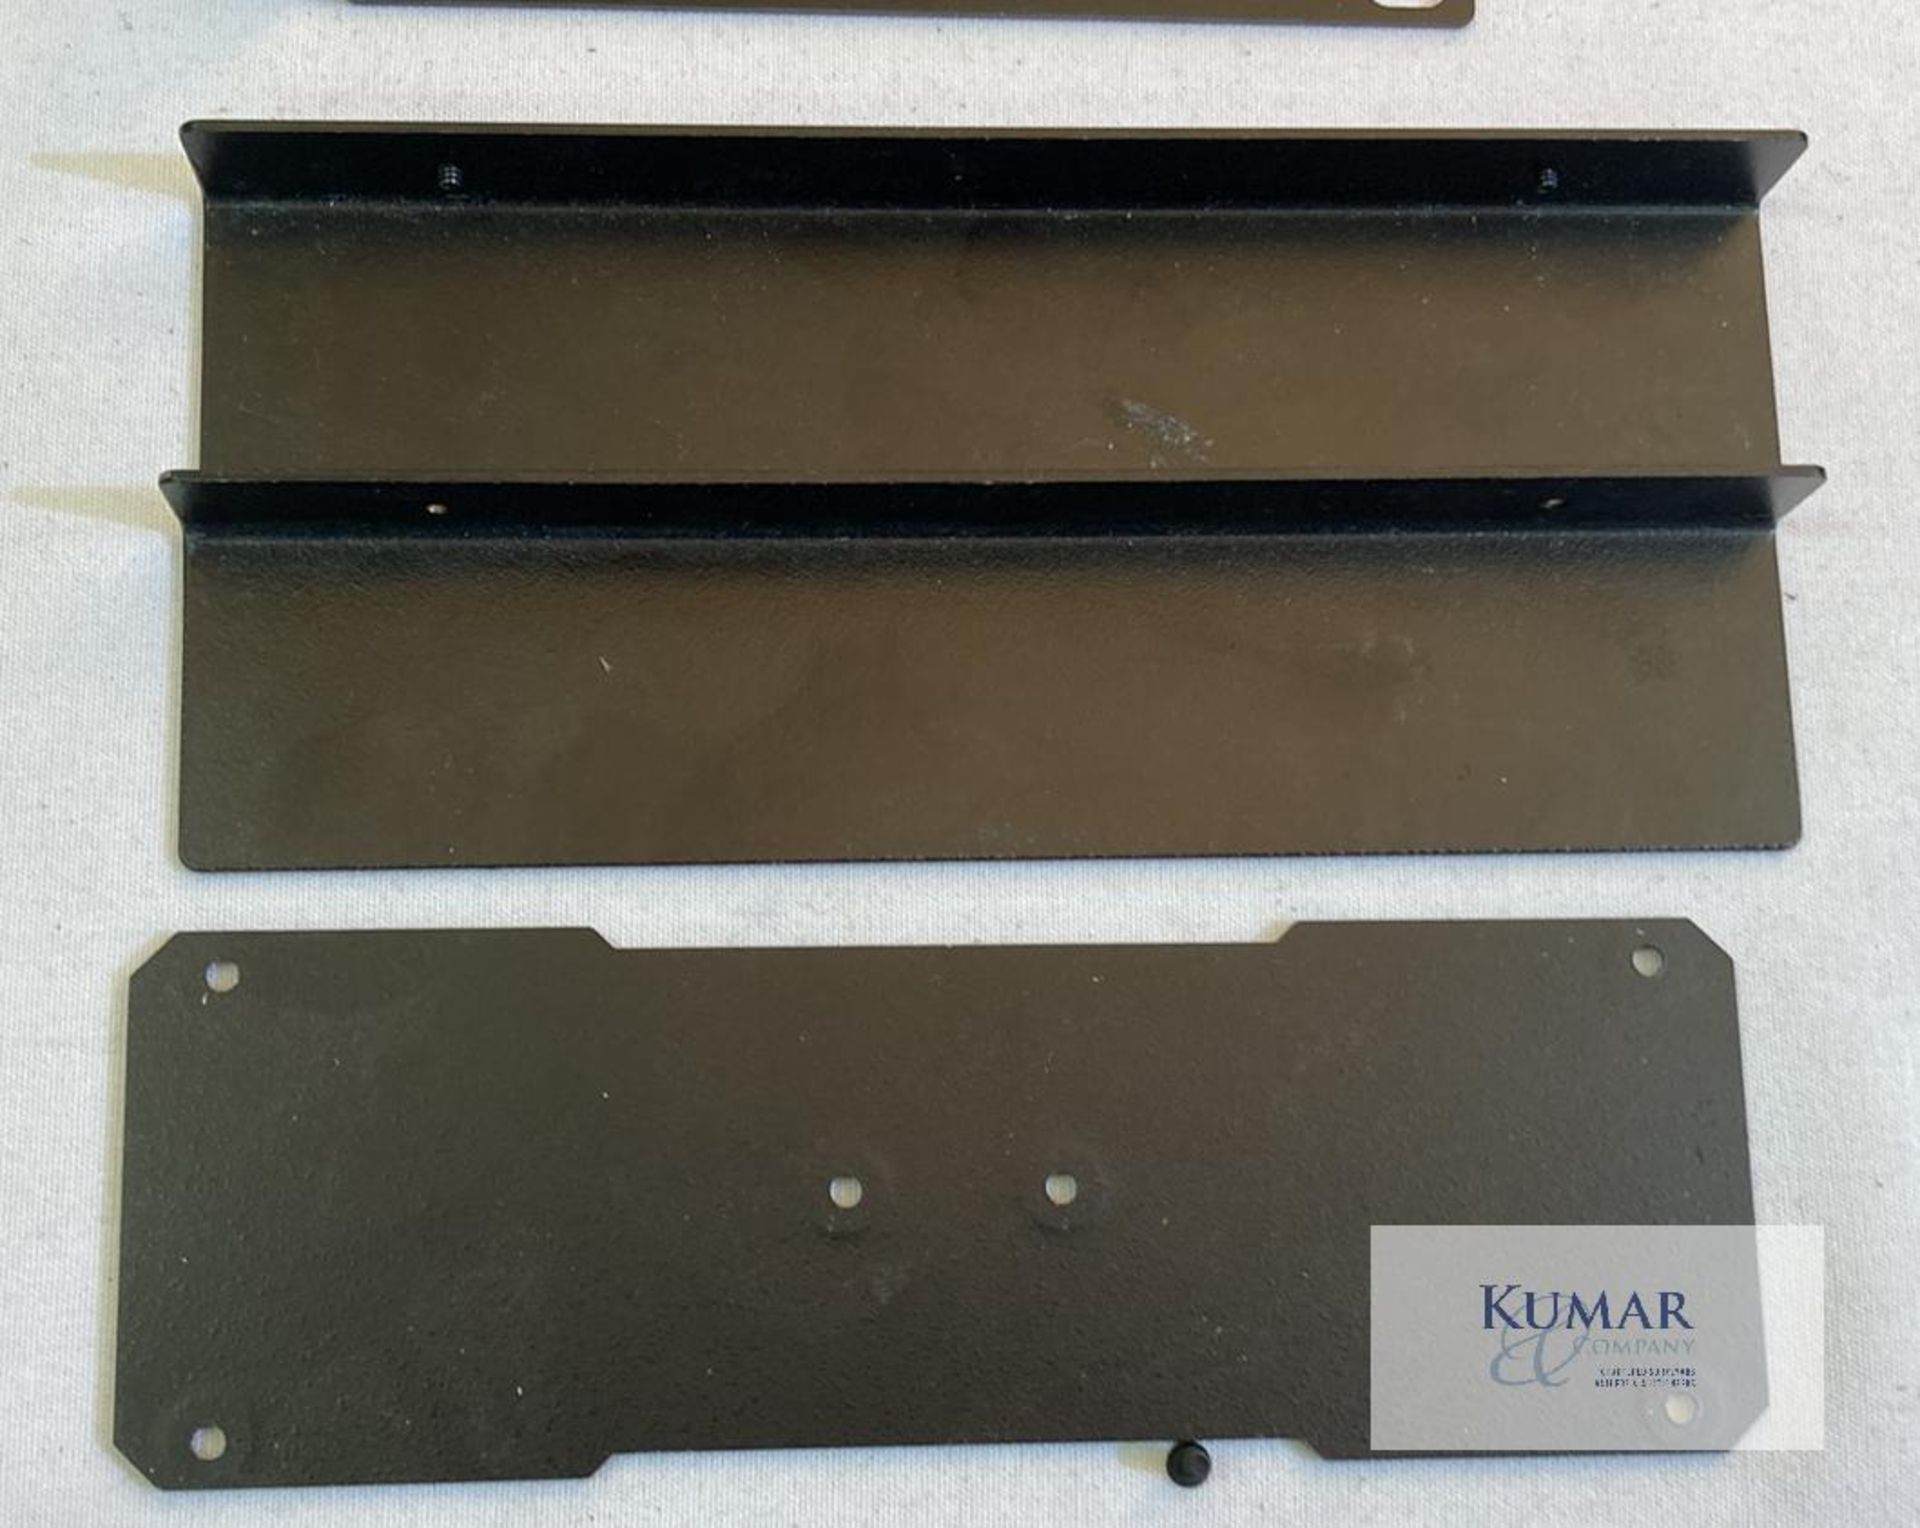 19" rack blanking plate and mounting assortment Description: Assortment of 19" blanking plates - Image 13 of 15